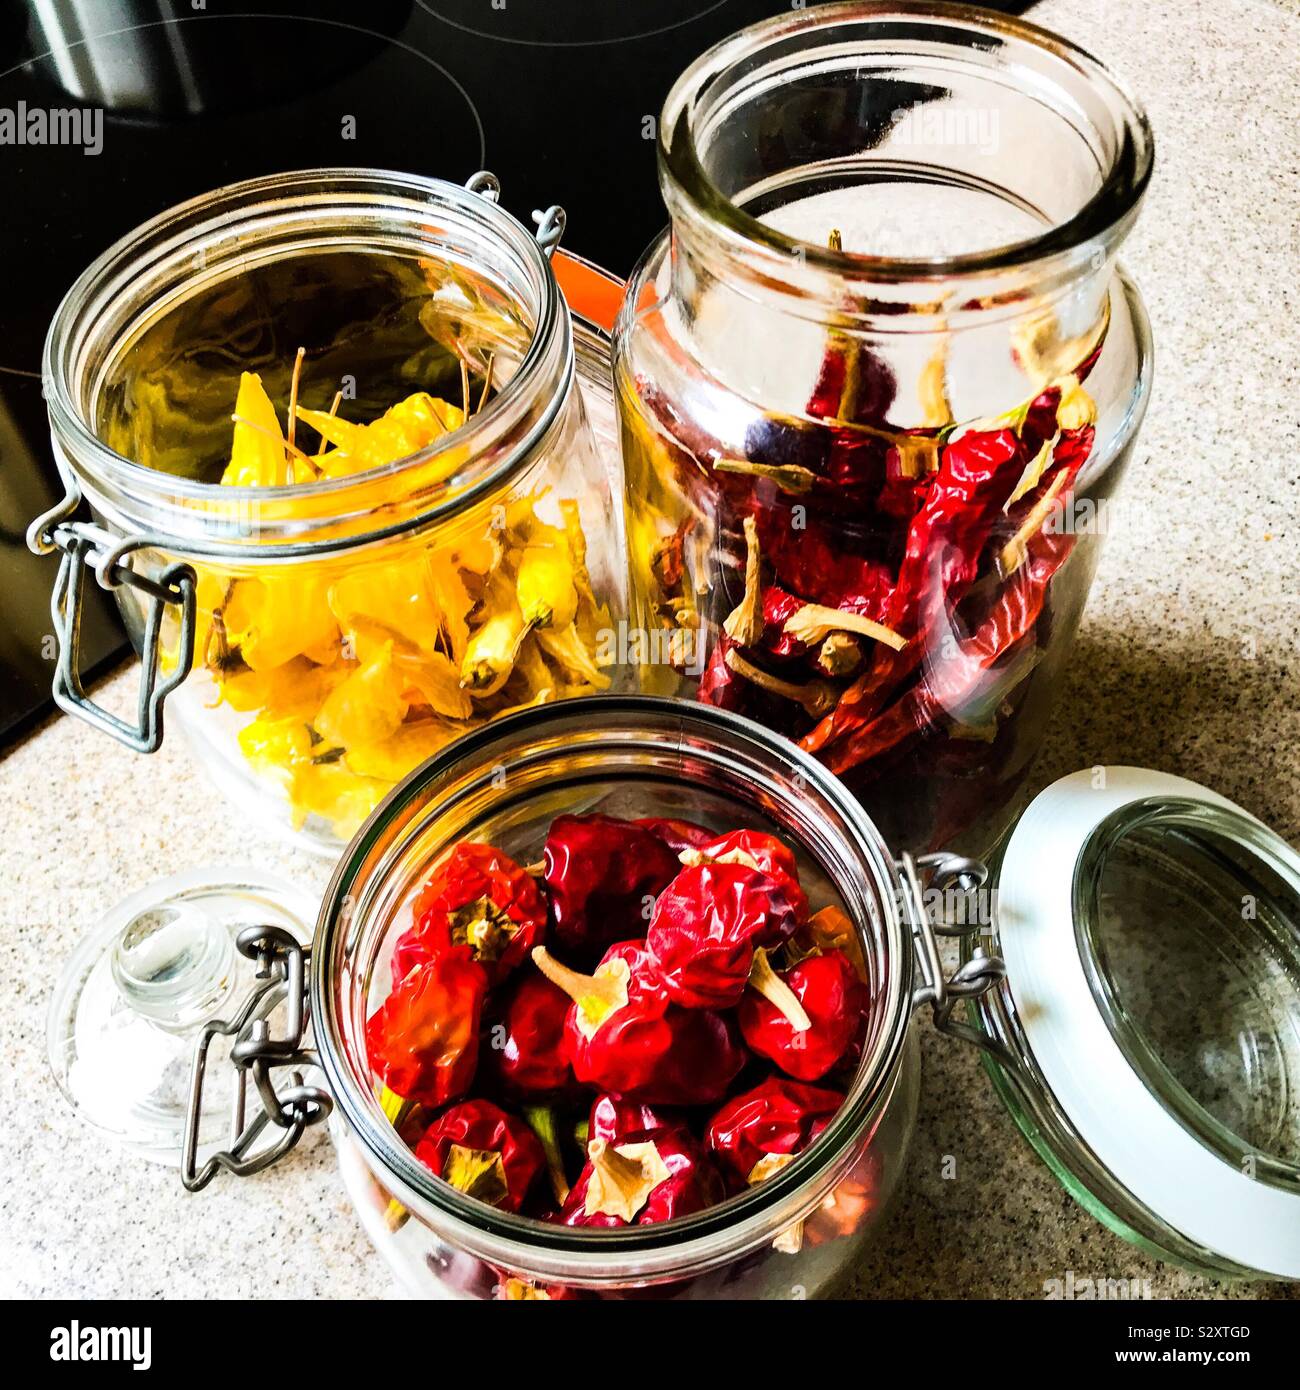 Red and yellow dried chillis in open Kilner jar storage on Corian kitchen work surface Stock Photo